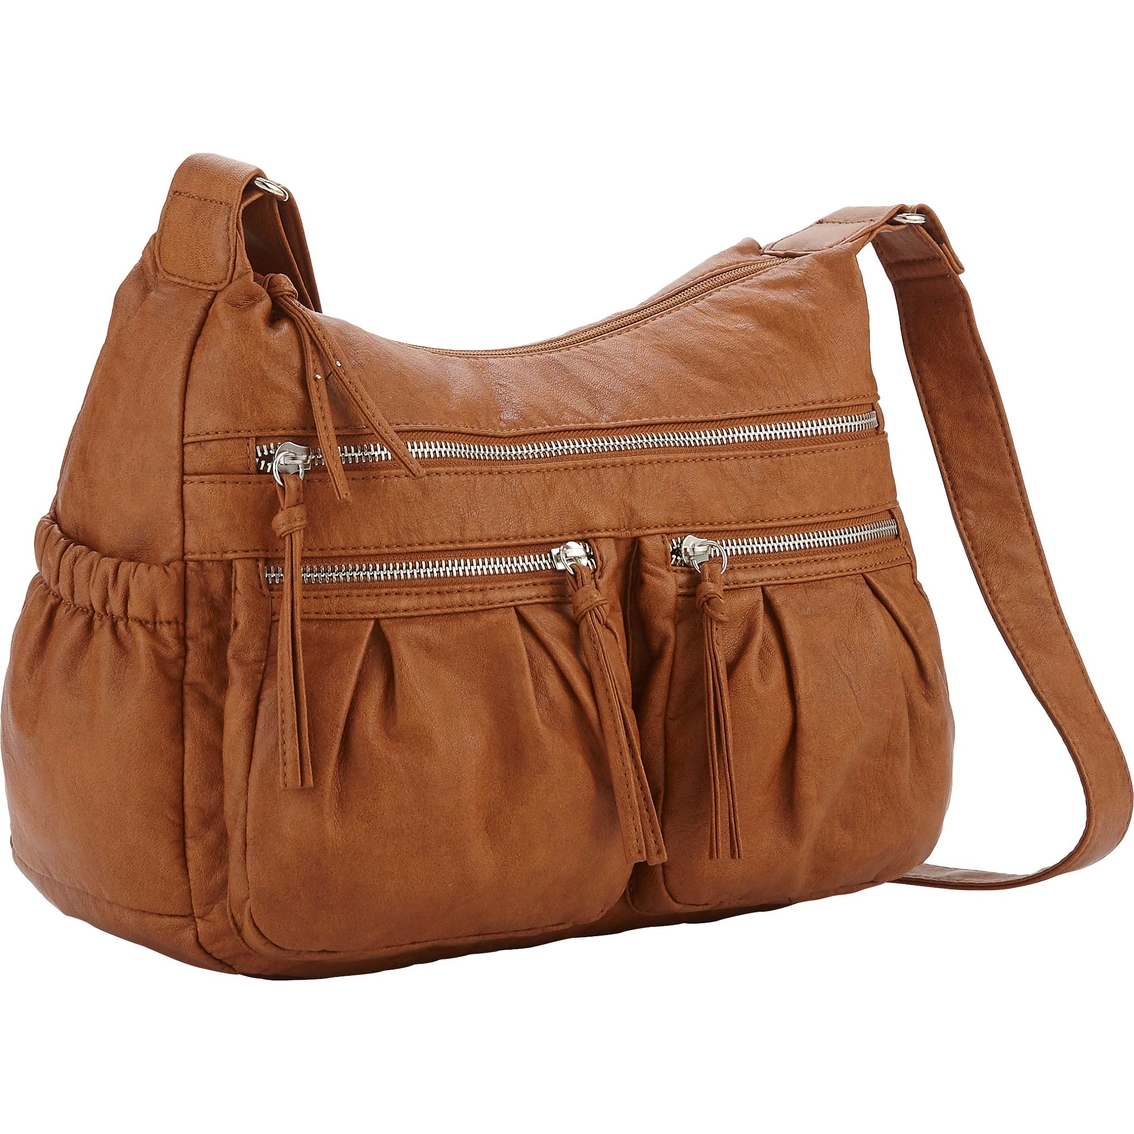 Bueno Vintage Washed Faux Leather Crossbody - Image 3 of 4